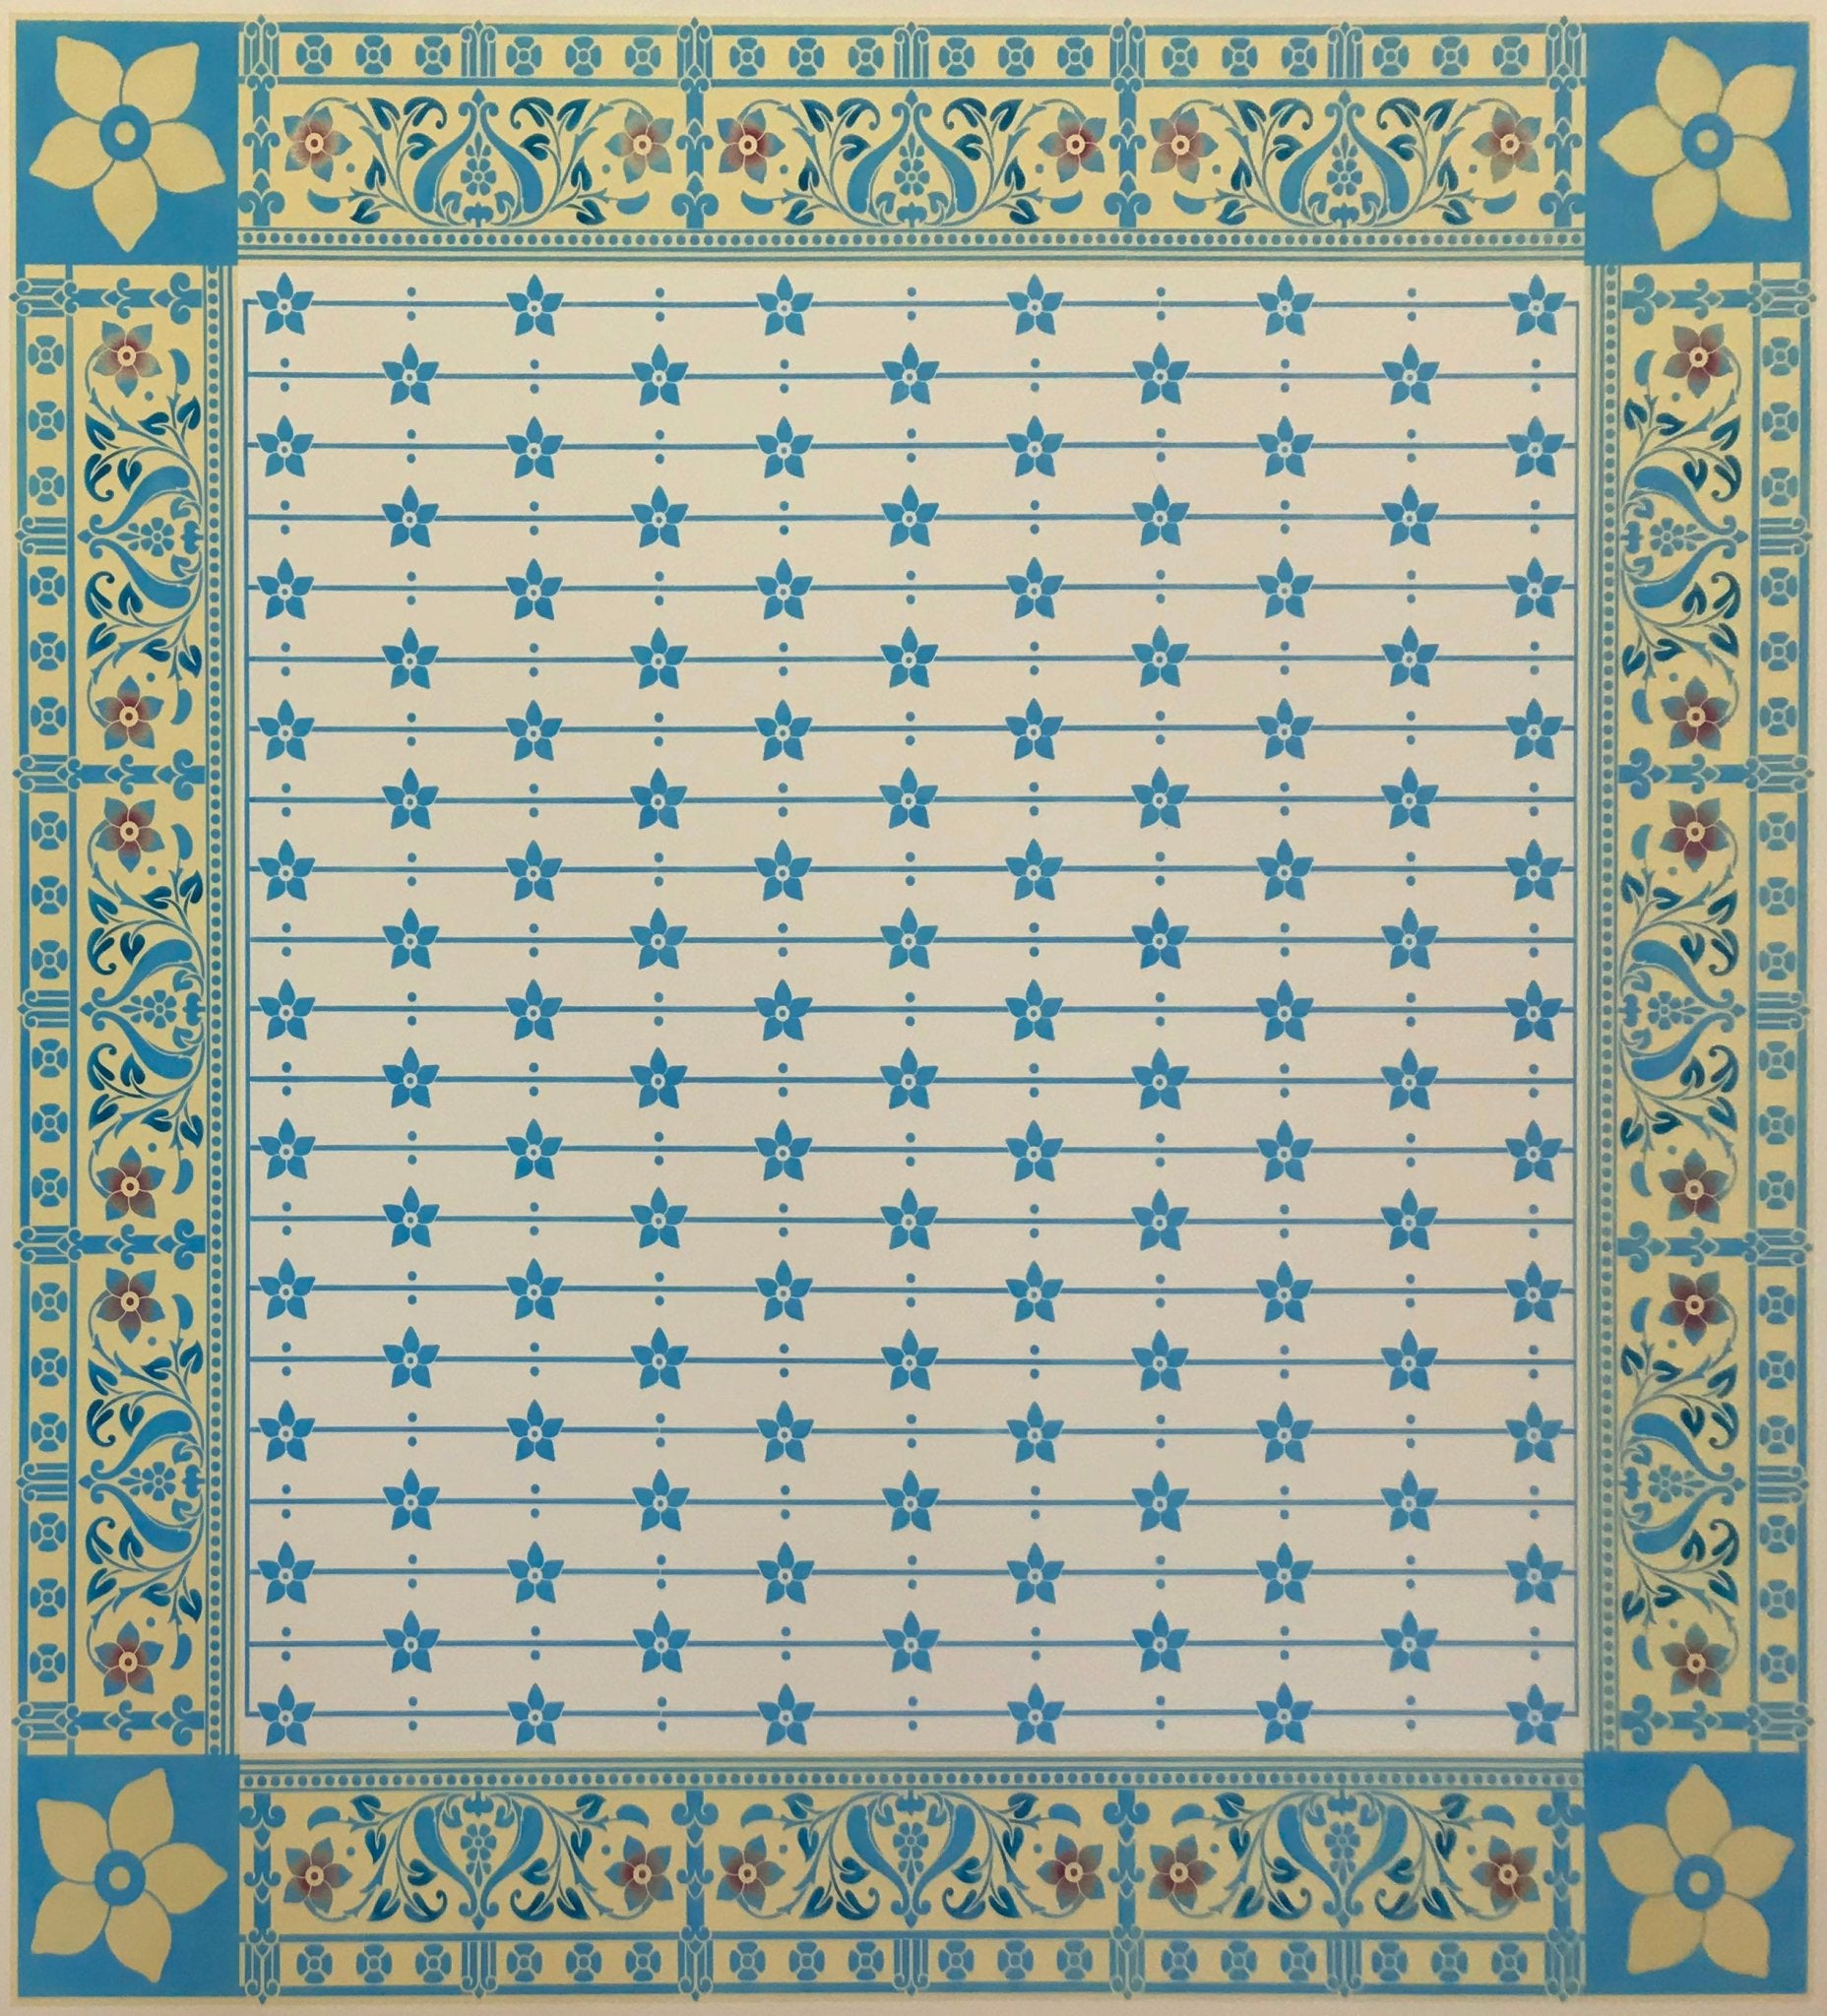 The full image of this square floorcloth based on a Christopher Dresser pattern from his book "Studies in Design", c. 1875.